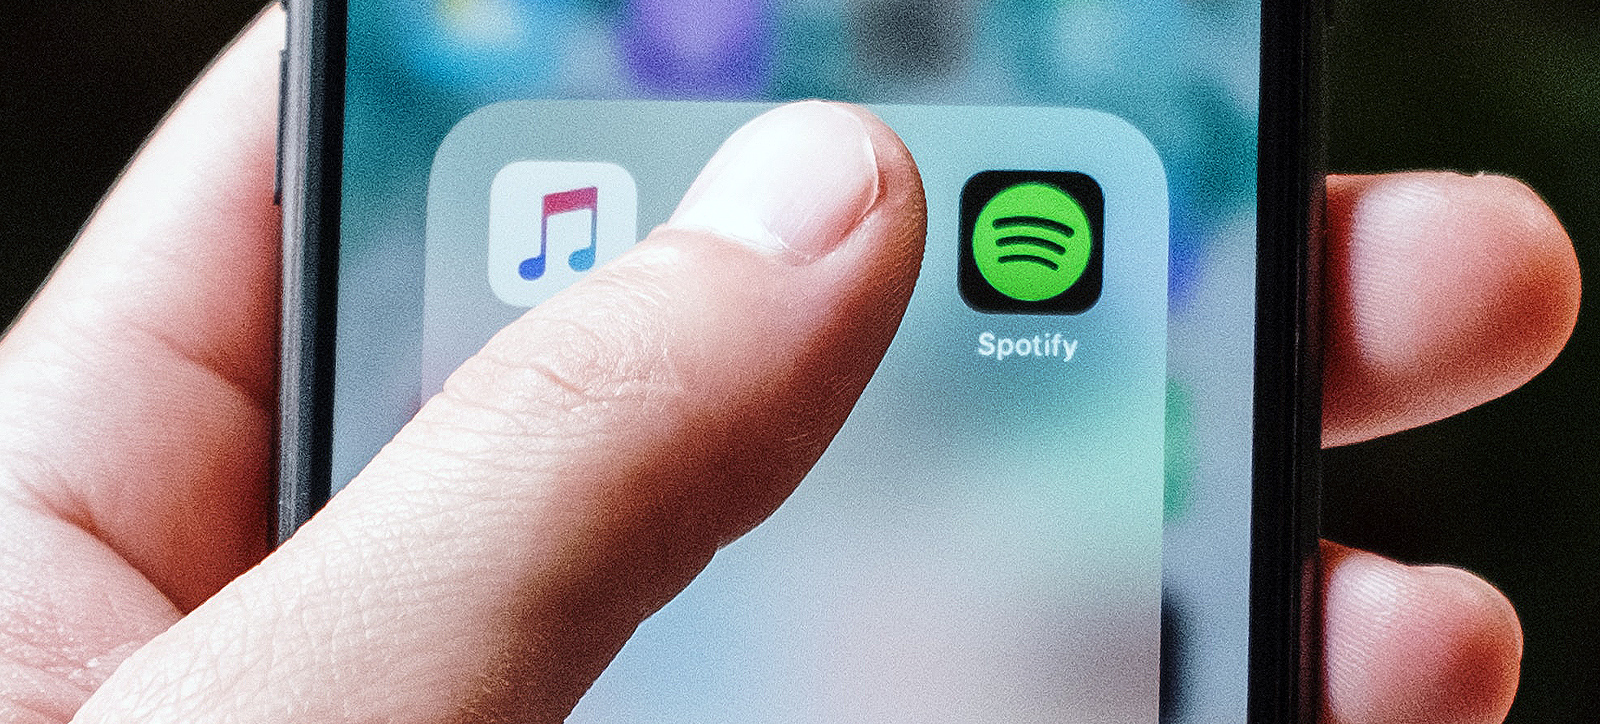 A smartphone user selects the Spotify app.